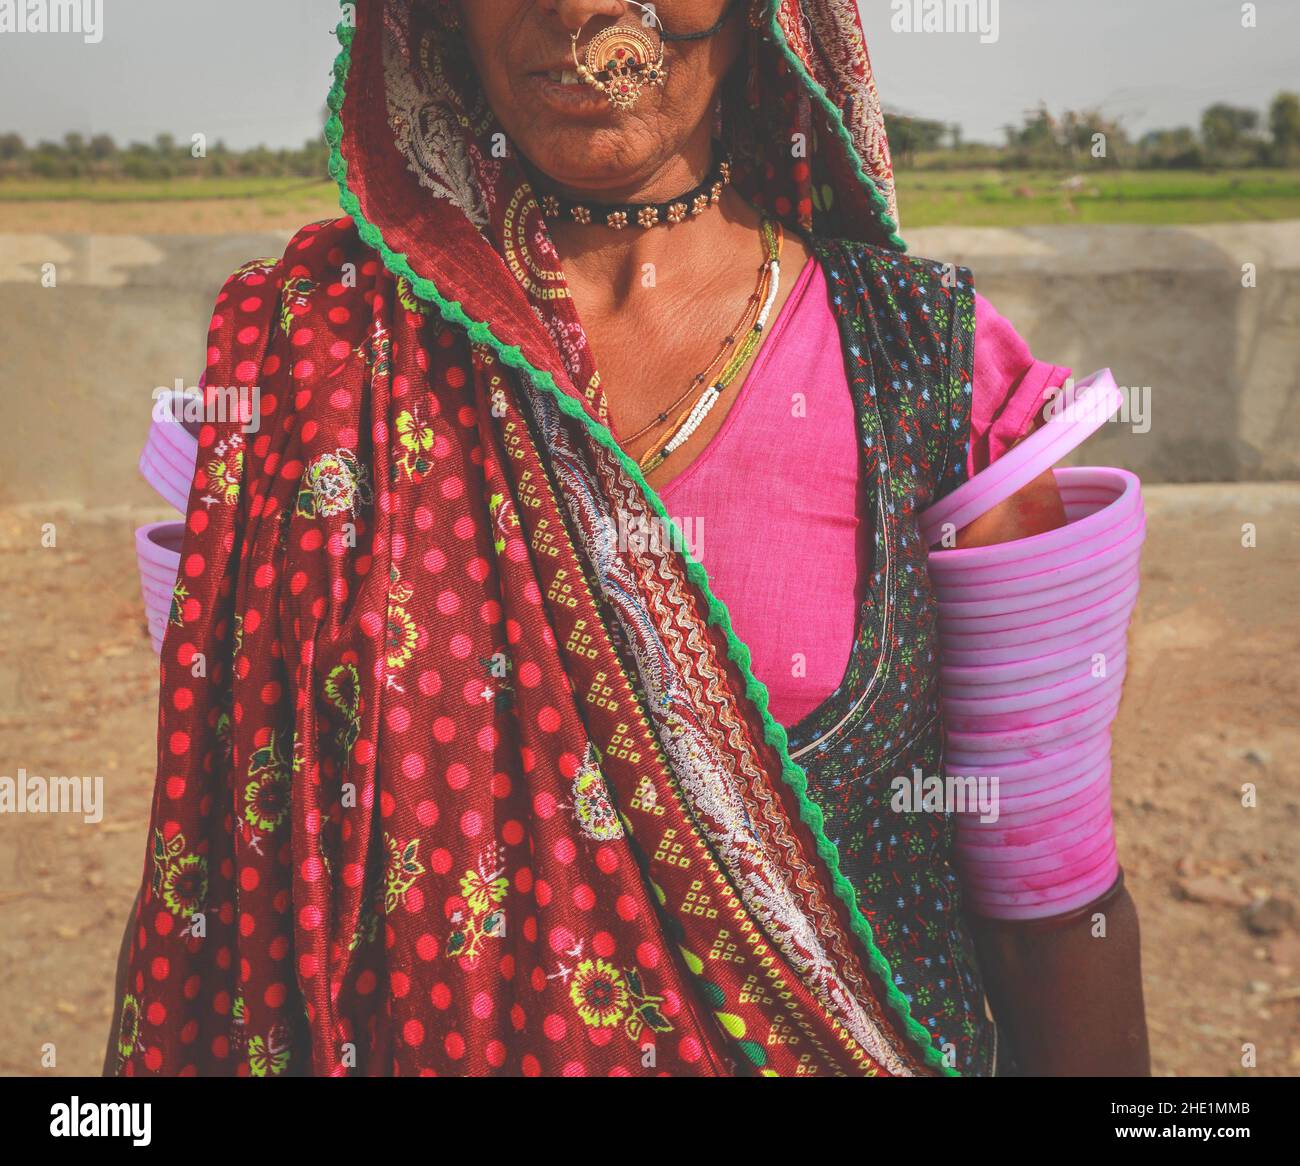 Helf face of Indian Rajasthani woman wearing traditional colourful clothing and jewellery Stock Photo